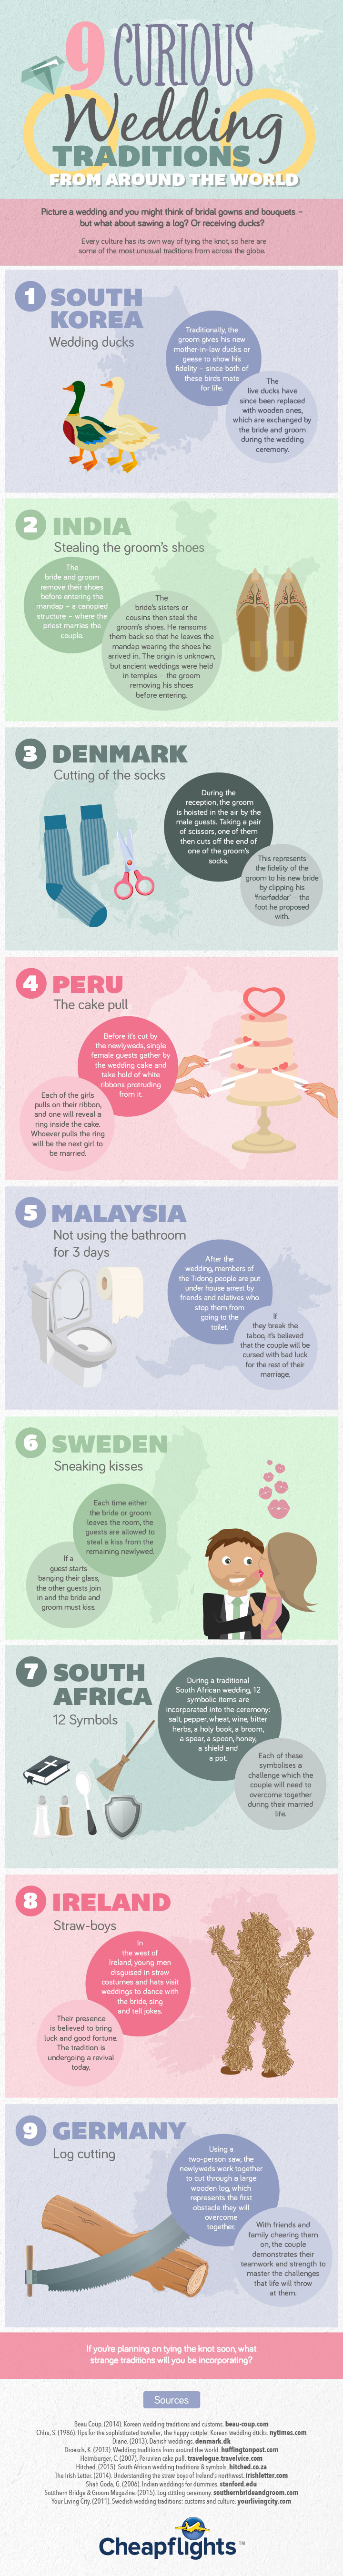 9 Curious Wedding Traditions From Around the World